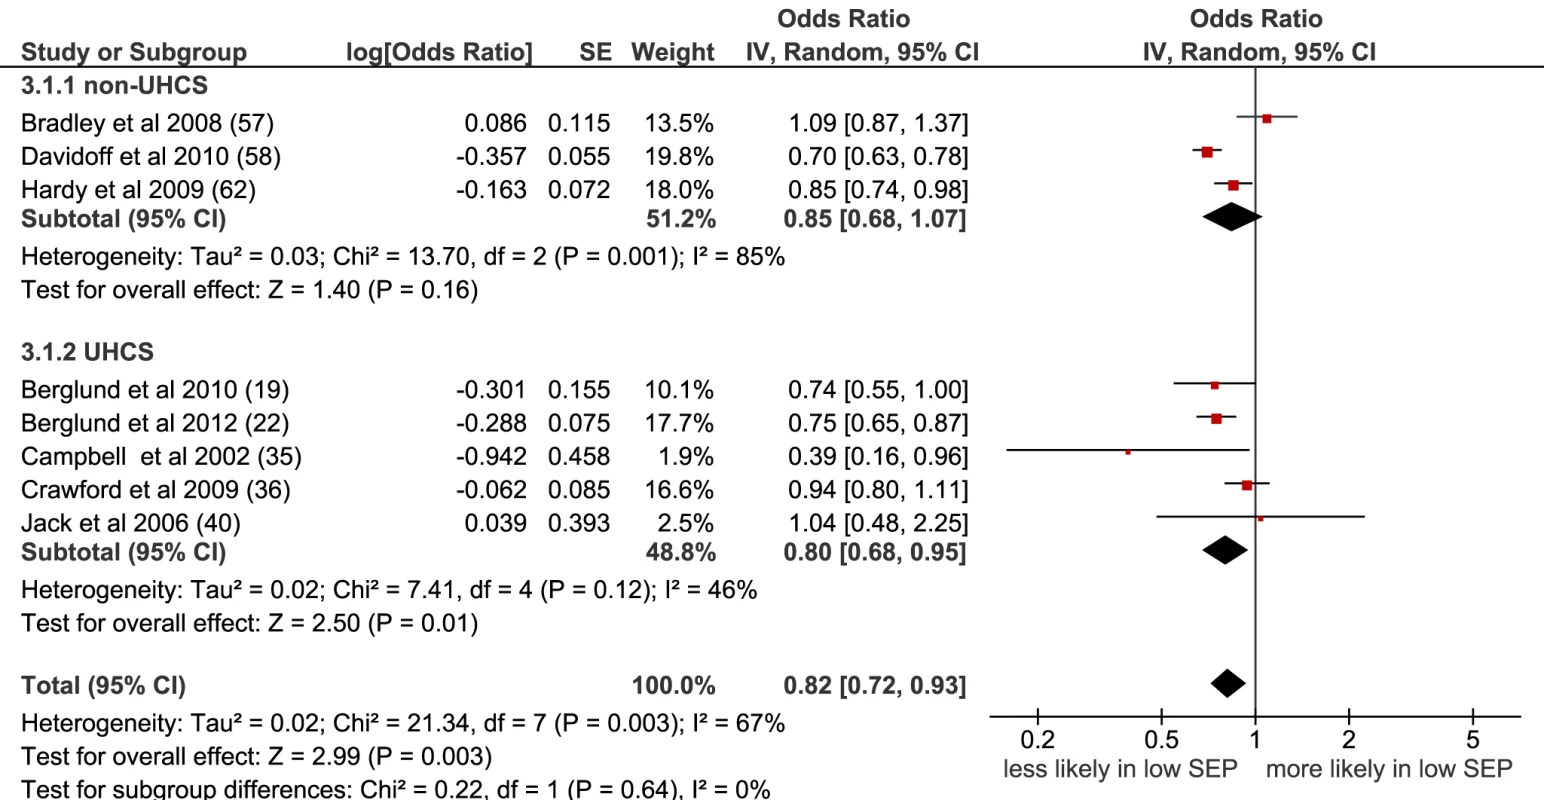 Meta-analysis of odds of receipt of chemotherapy in low versus high SEP.